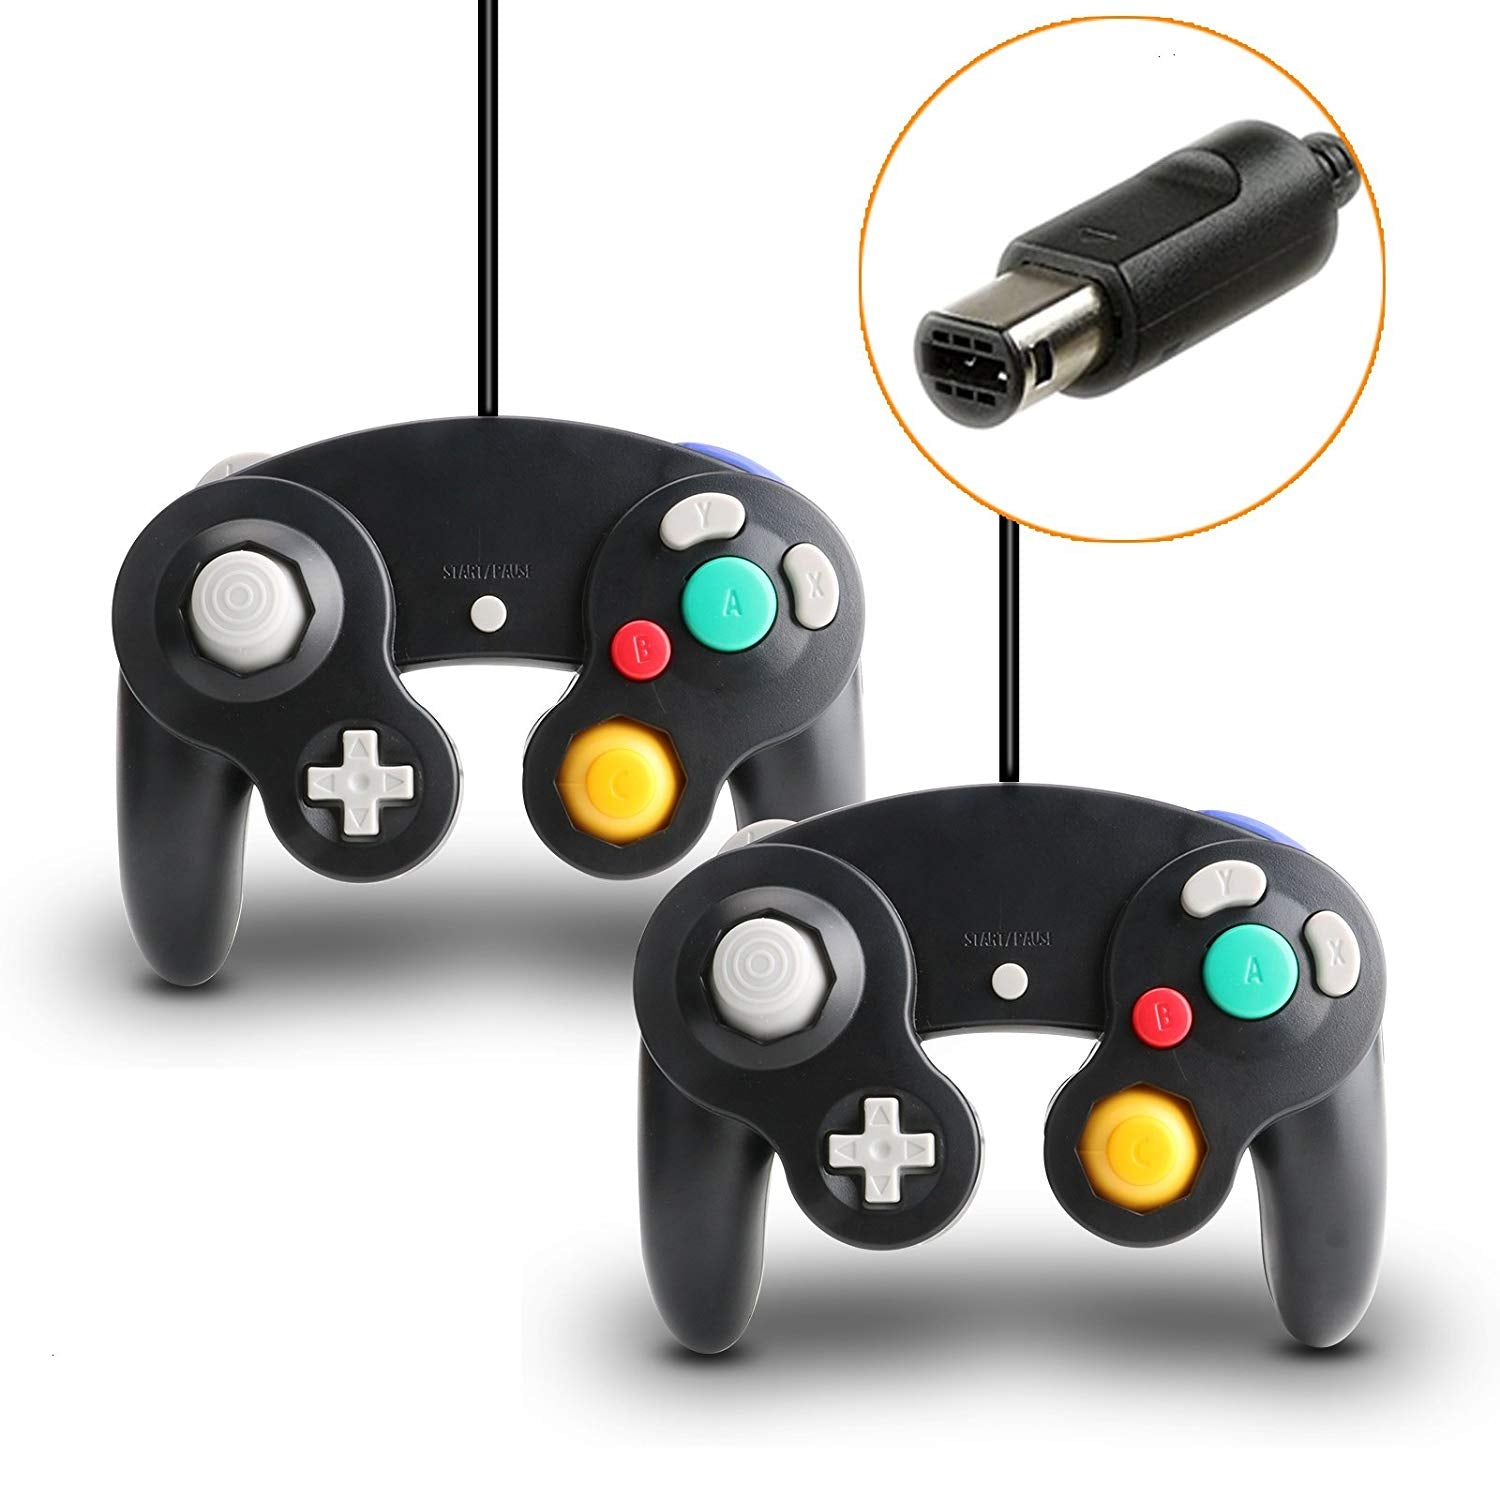 repulsion det sidste lys pære GameCube Controller for Nintendo Wii and GameCube [2 Packs]